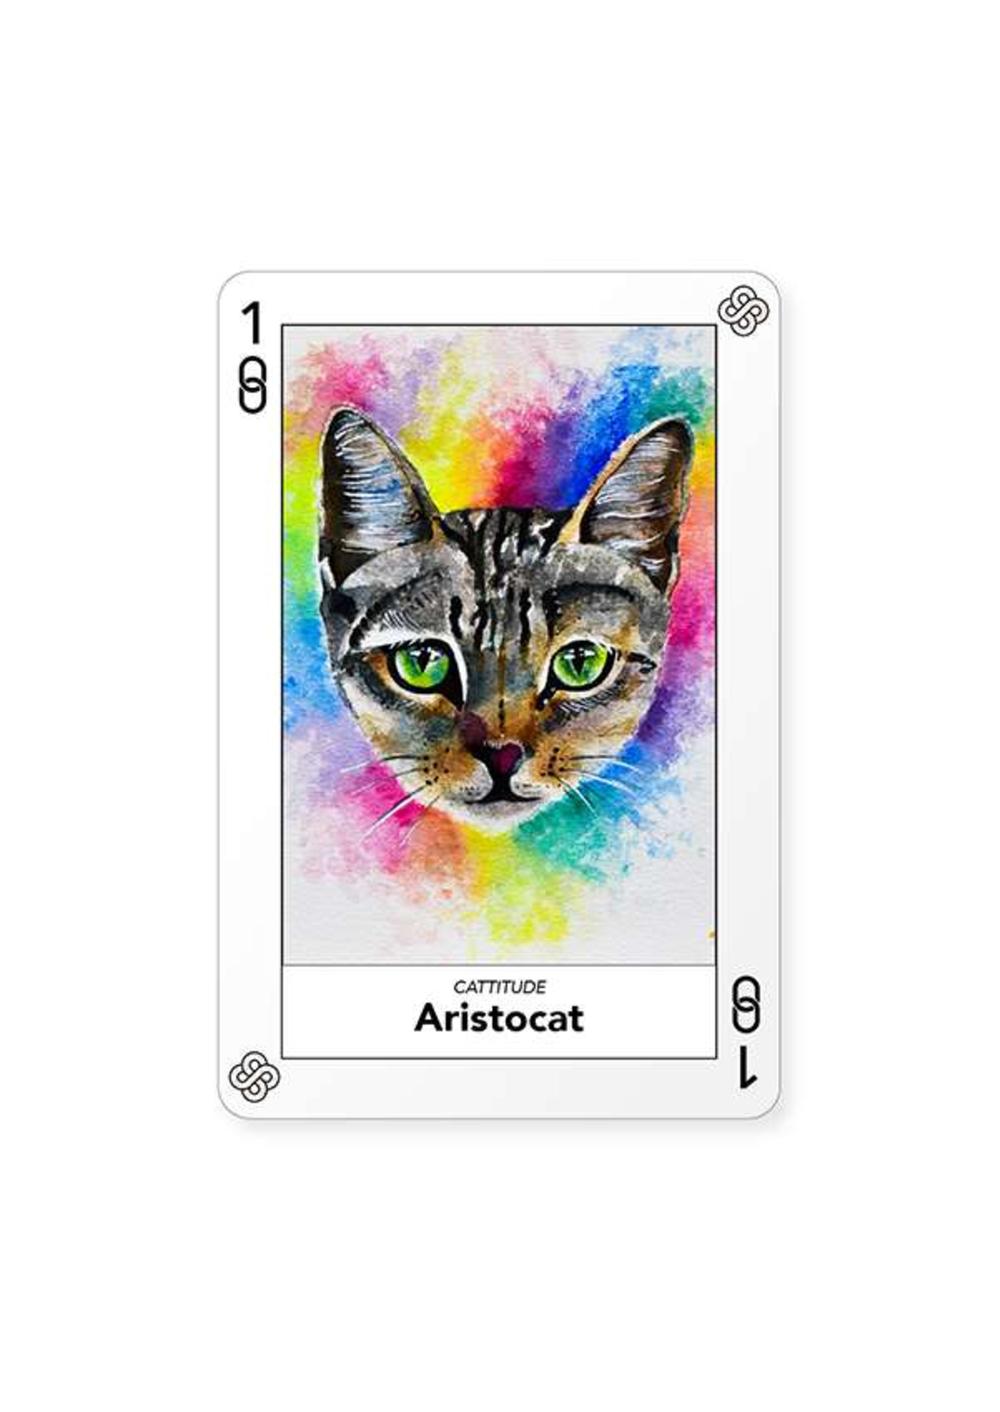 Certificate of Authenticity and Consignment - Aristocat